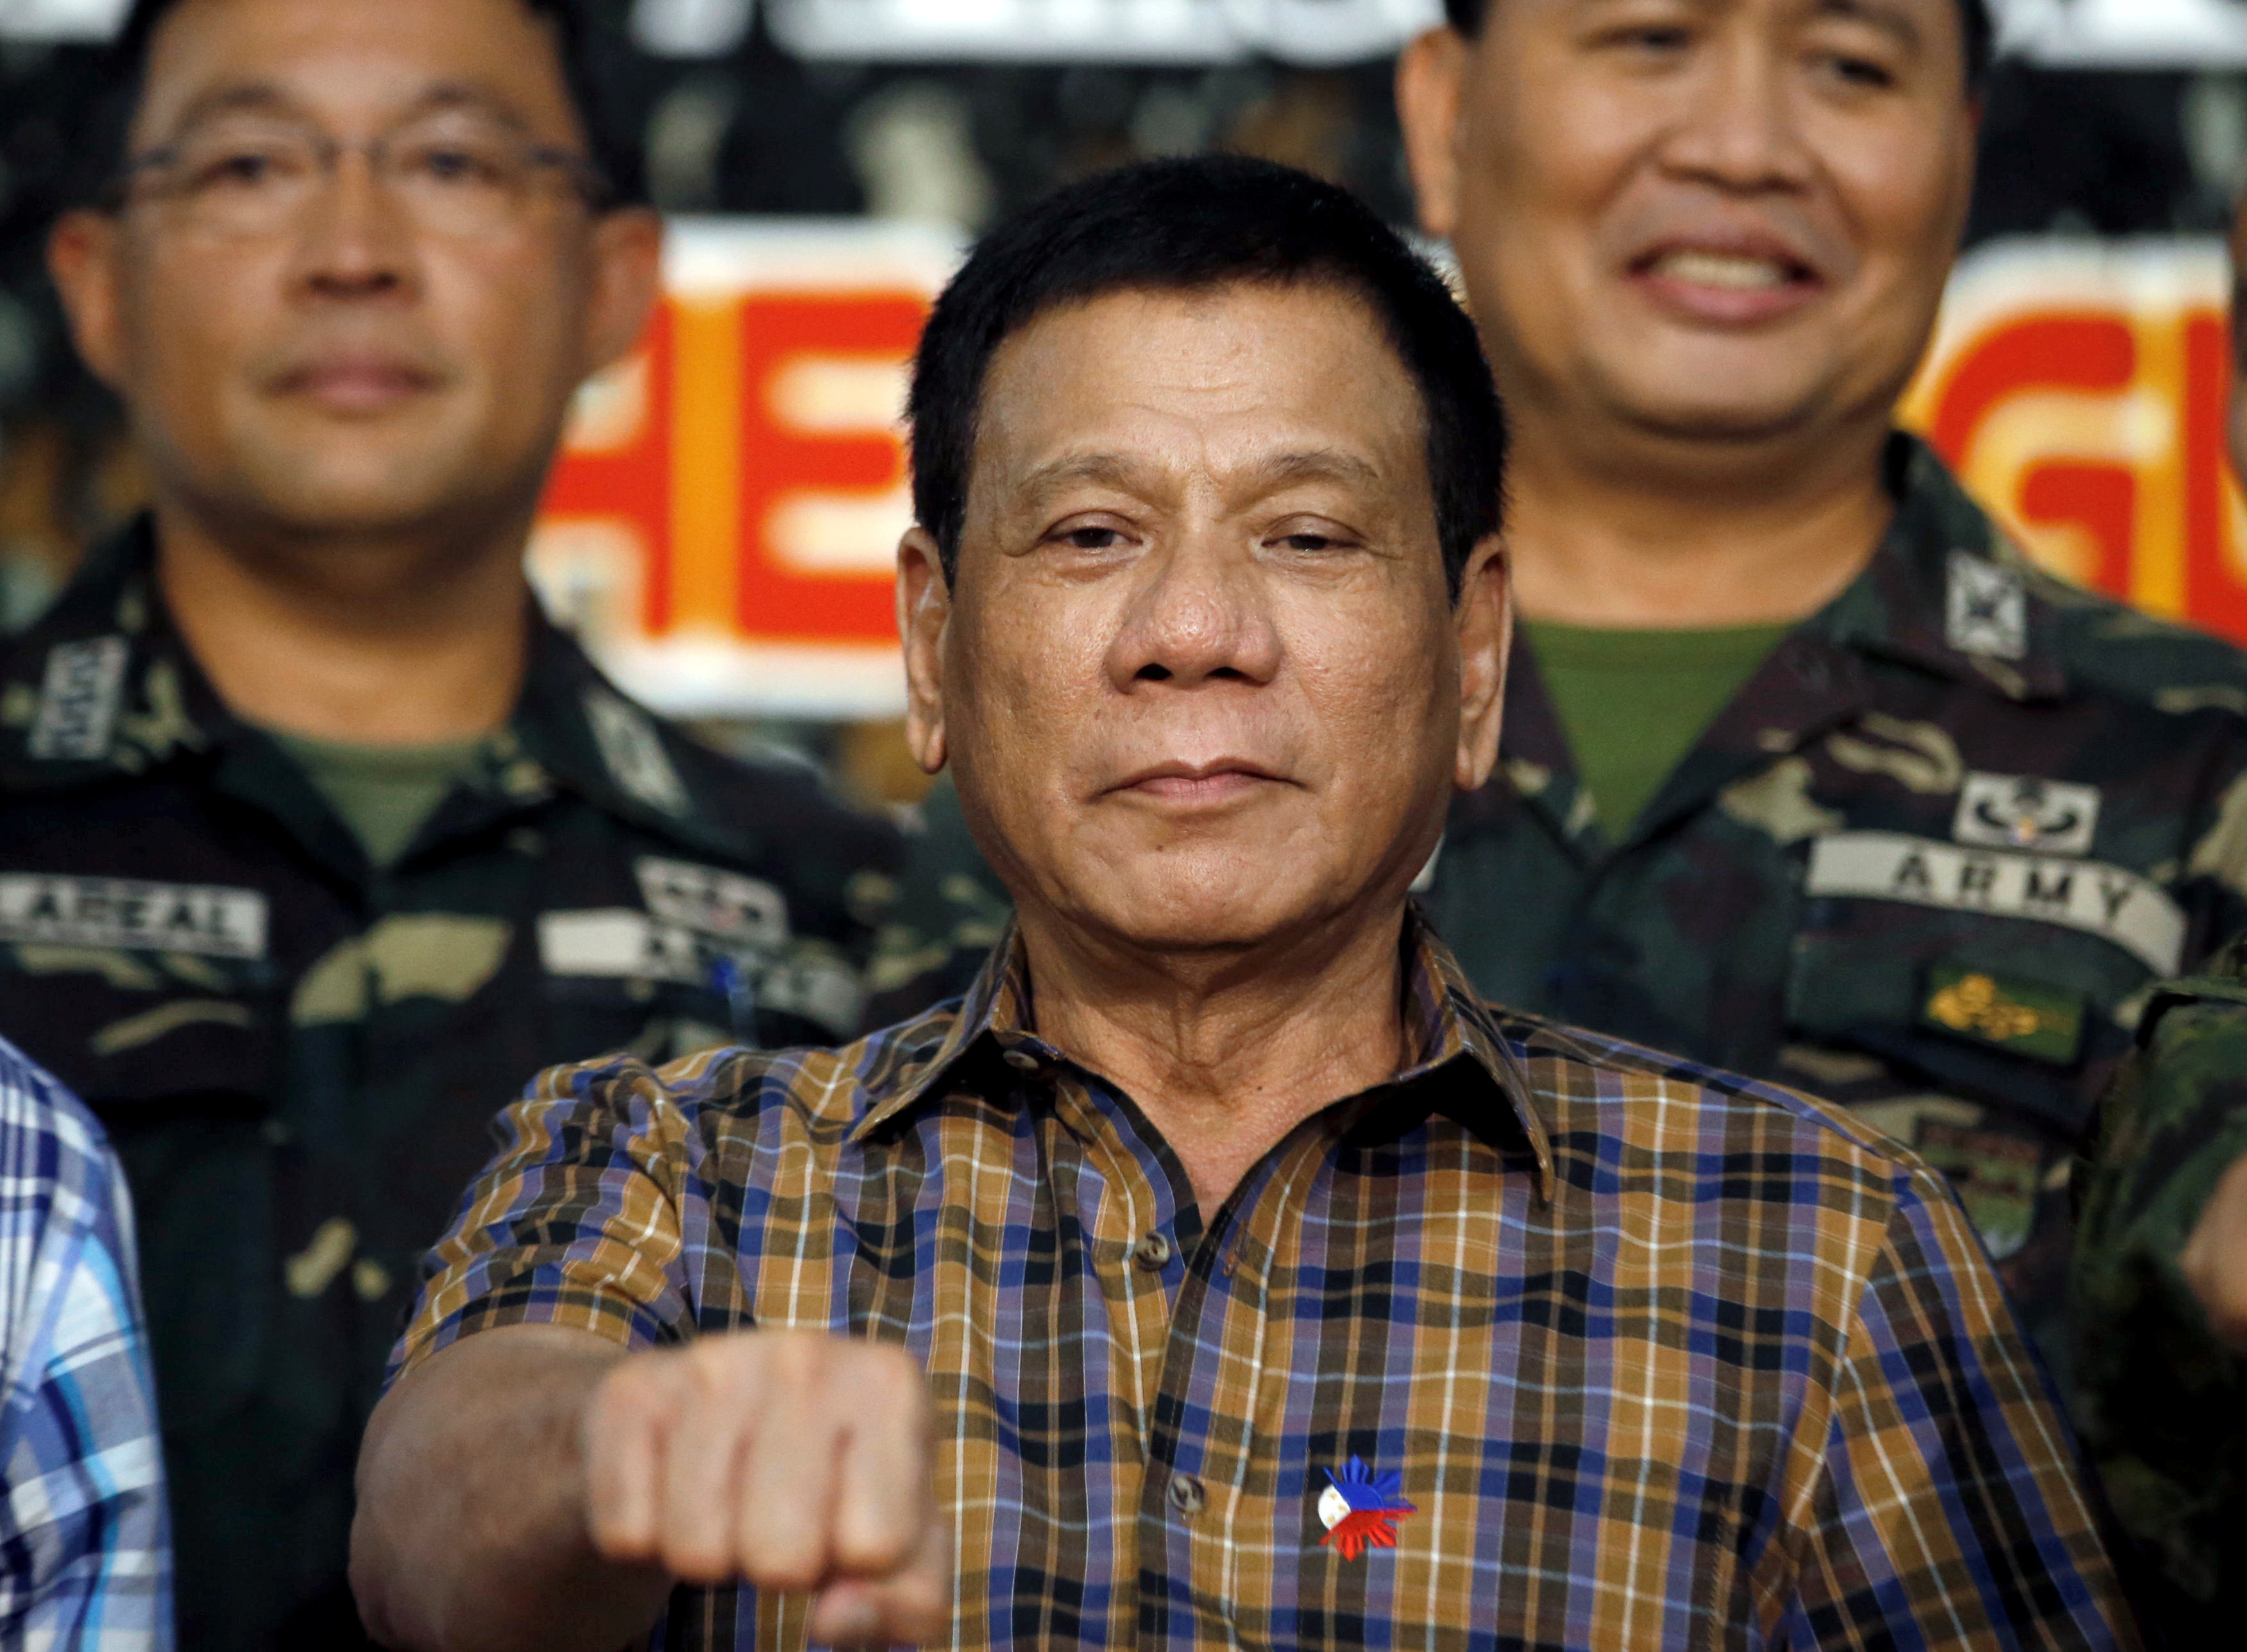 Philippine President Rodrigo Duterte gestures at soldiers during a visit at Capinpin military camp in Tanay, in the Philippine province of Rizal, on Aug. 24, 2016 (Erik de Castro—Reuters)